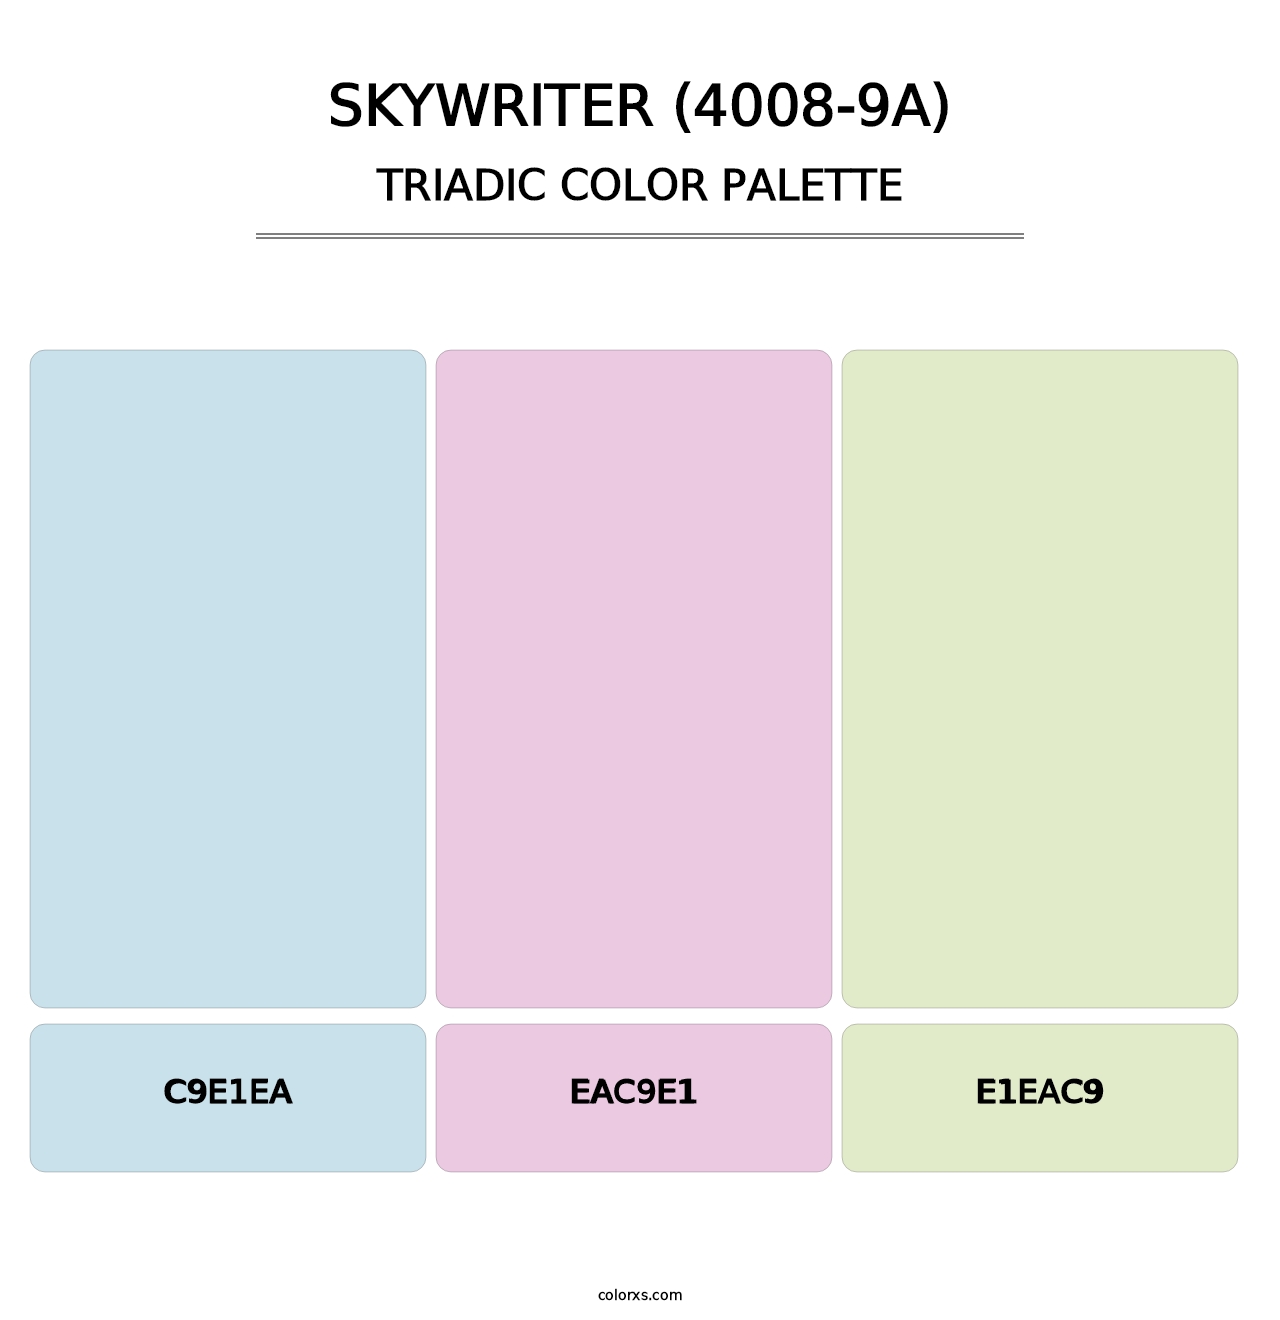 Skywriter (4008-9A) - Triadic Color Palette